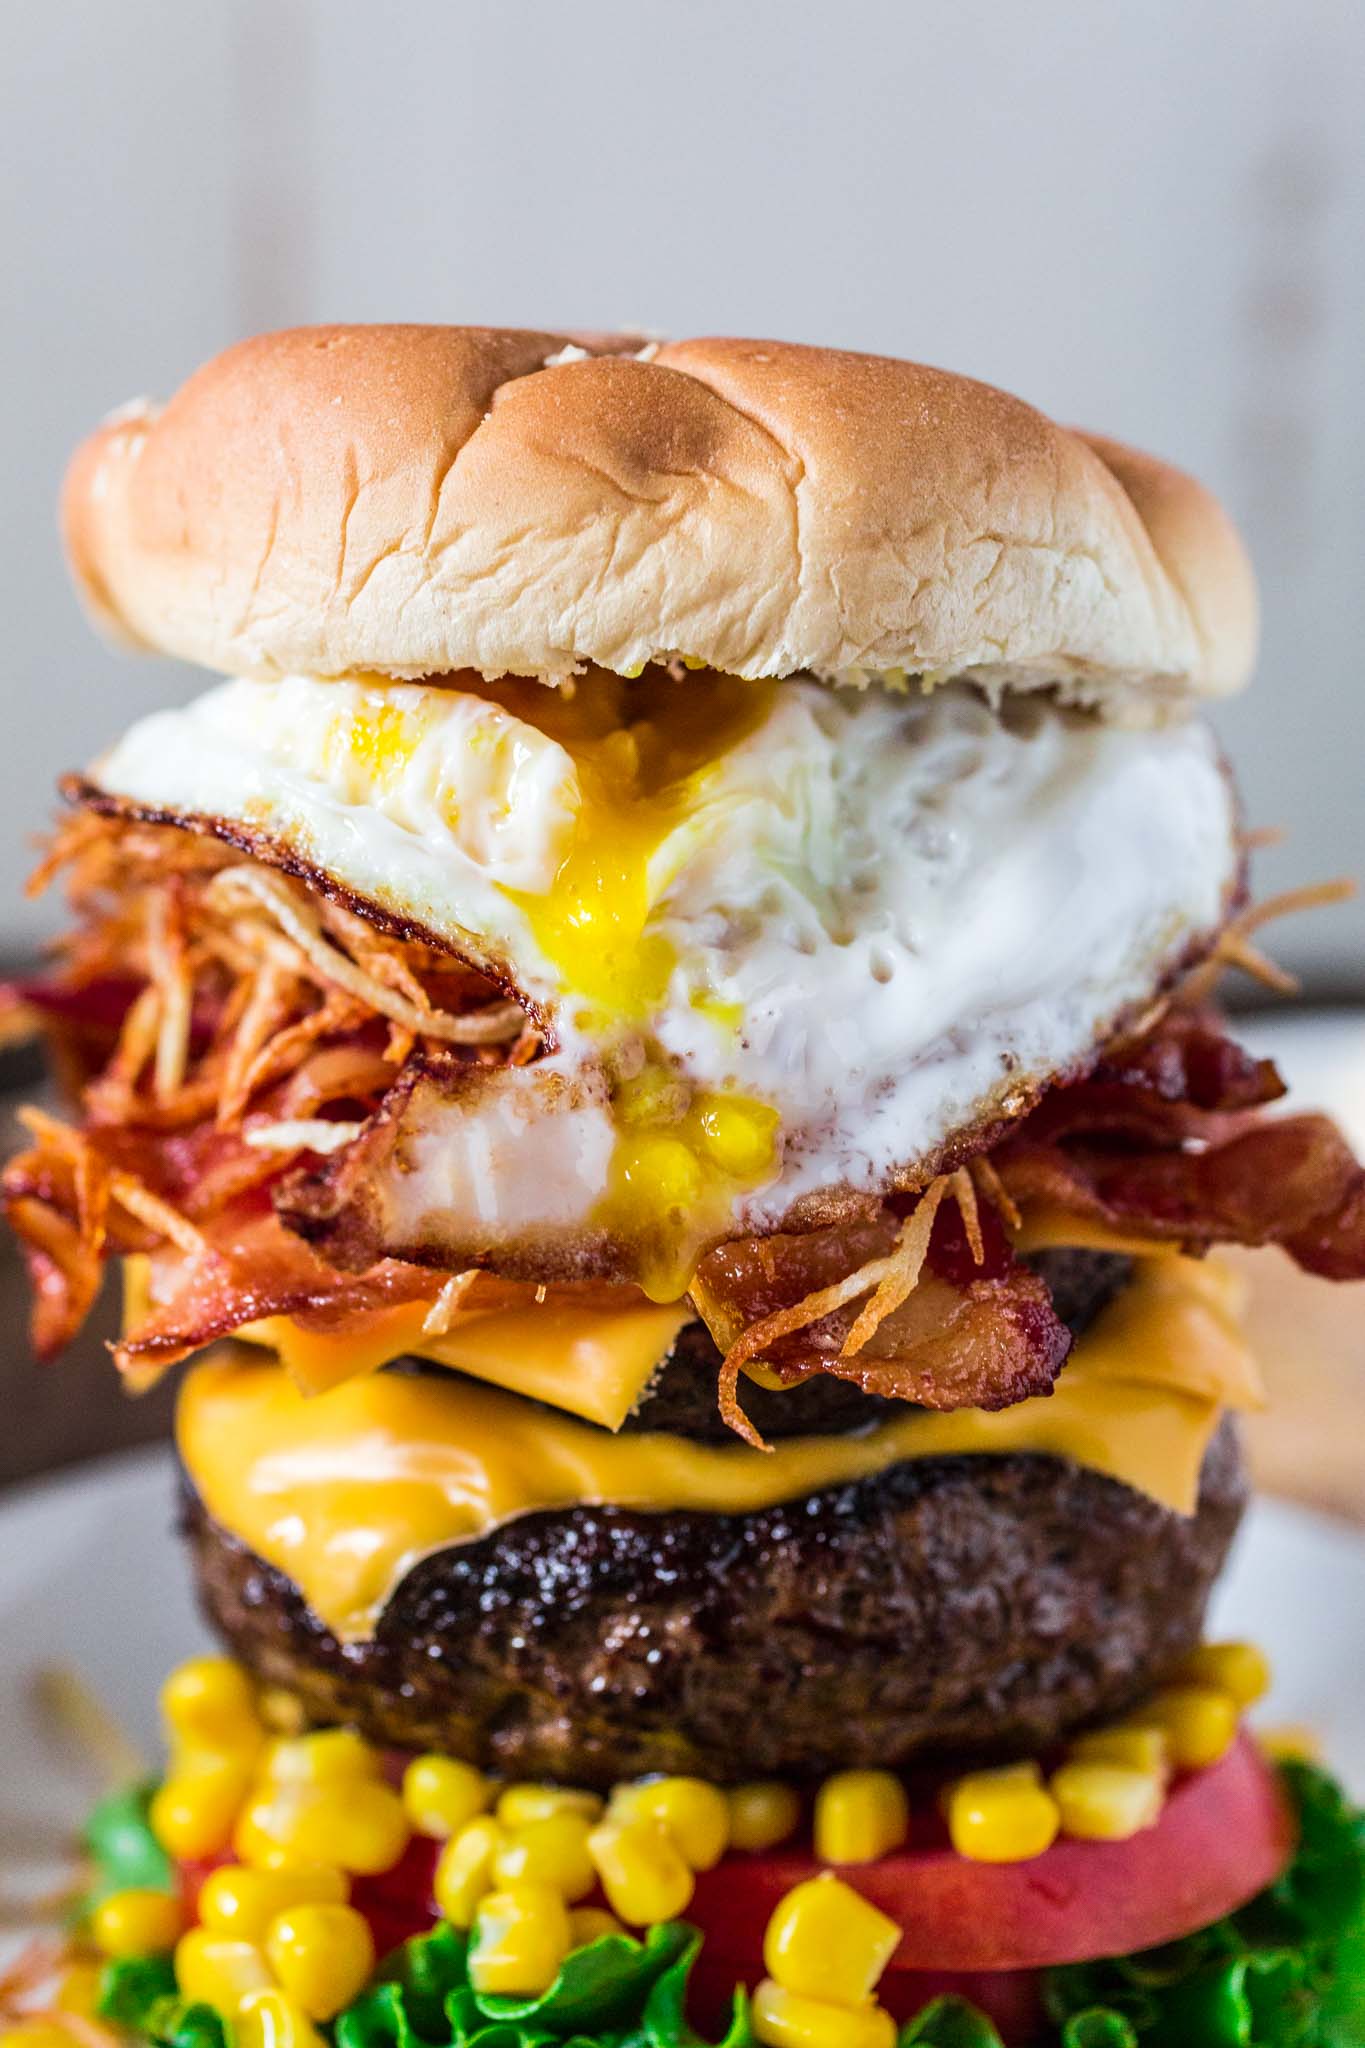 Brazilian Epic Burger with Egg | www.oliviascuisine.com | This monstrous burger is not for the faint of heart. Piled high with two burger patties and an assortment of bold toppings, no burger is more EPIC than this!